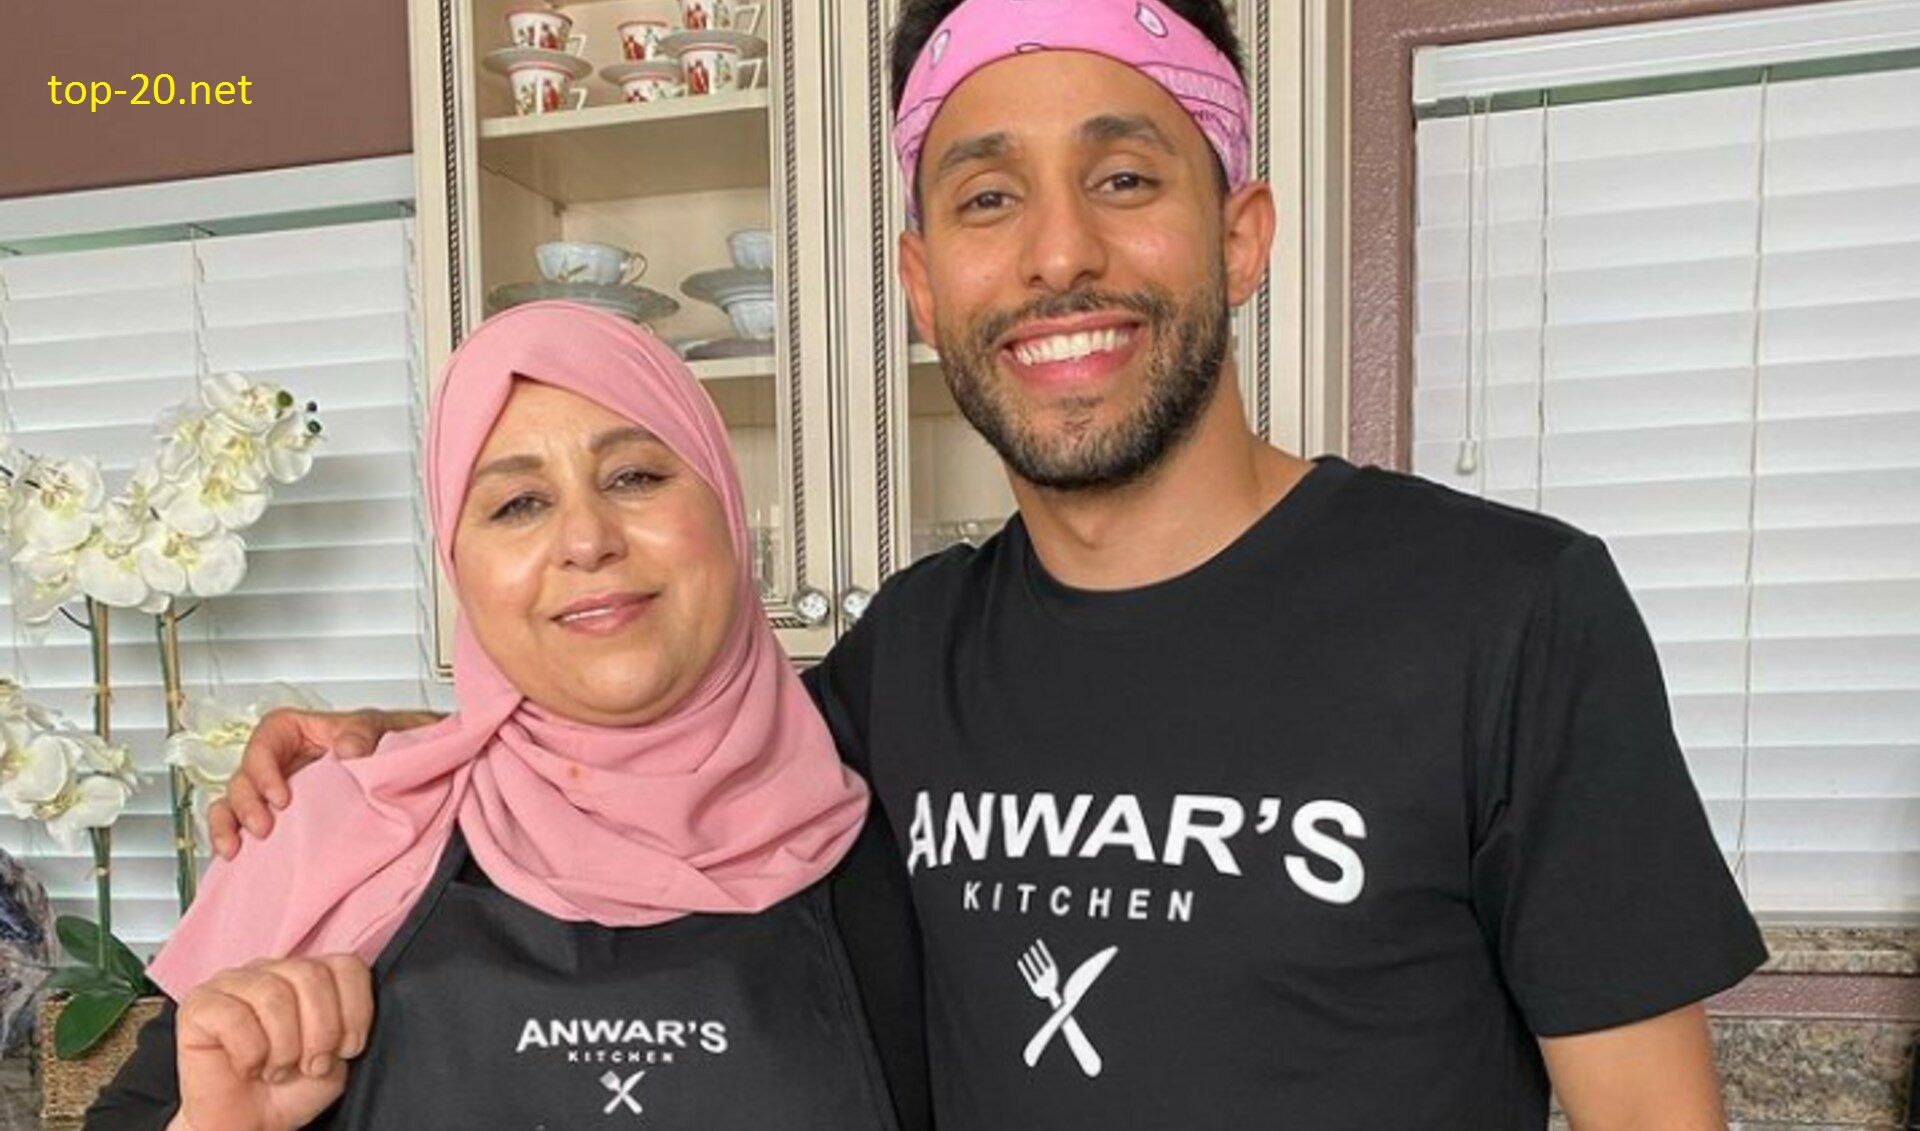 More about Anwar Jibawi